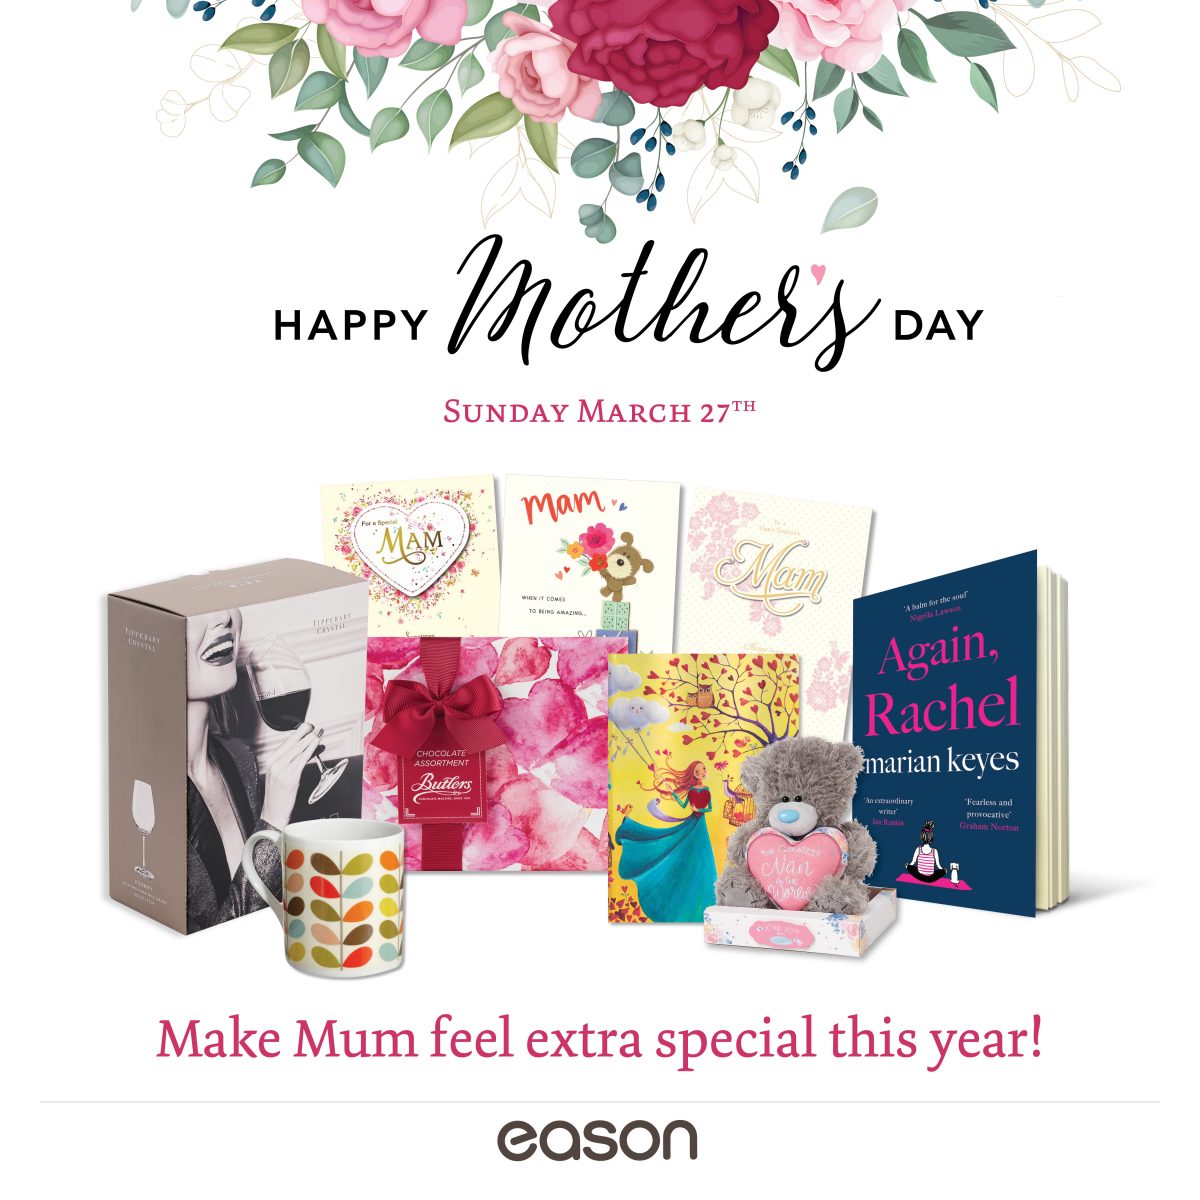 Mother's Day Gift Guide | Gift Ideas Cork | Mahon Point Shopping Centre